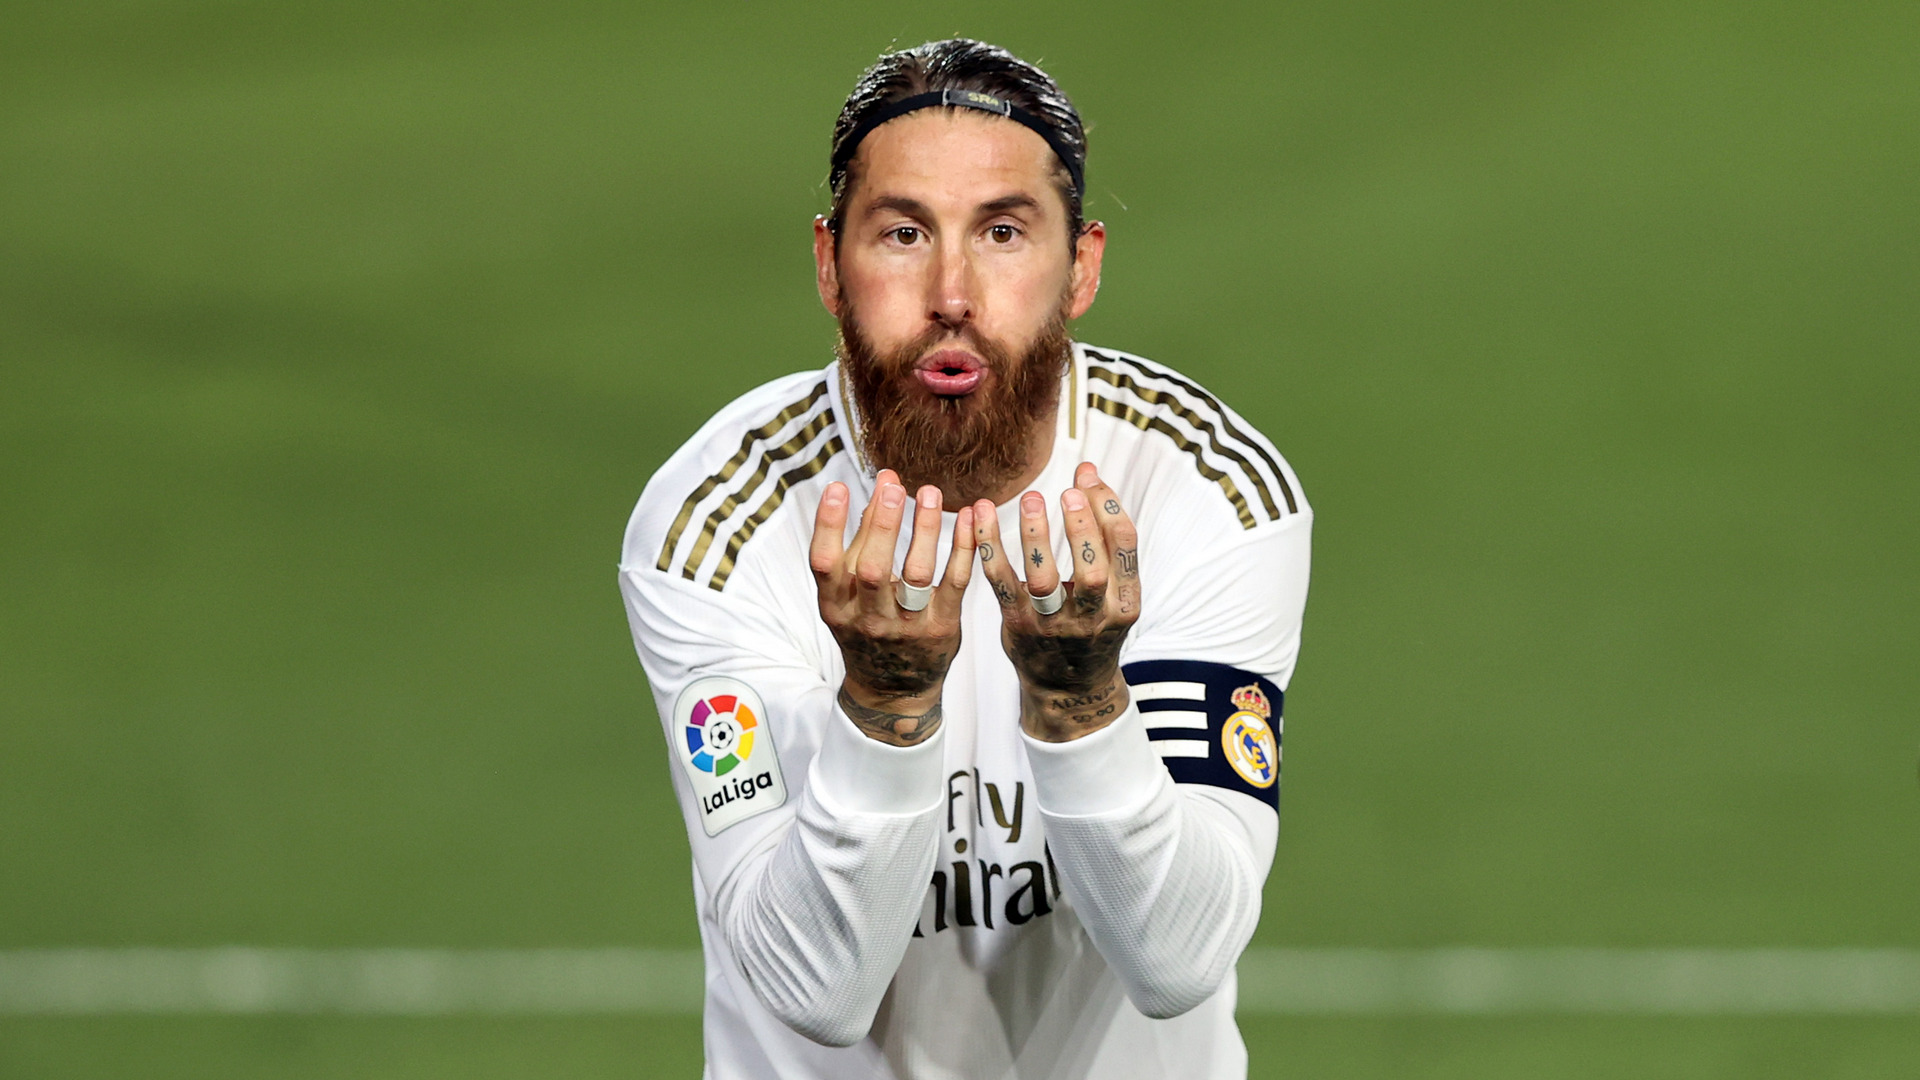 What next for Sergio Ramos after Real Madrid departure?